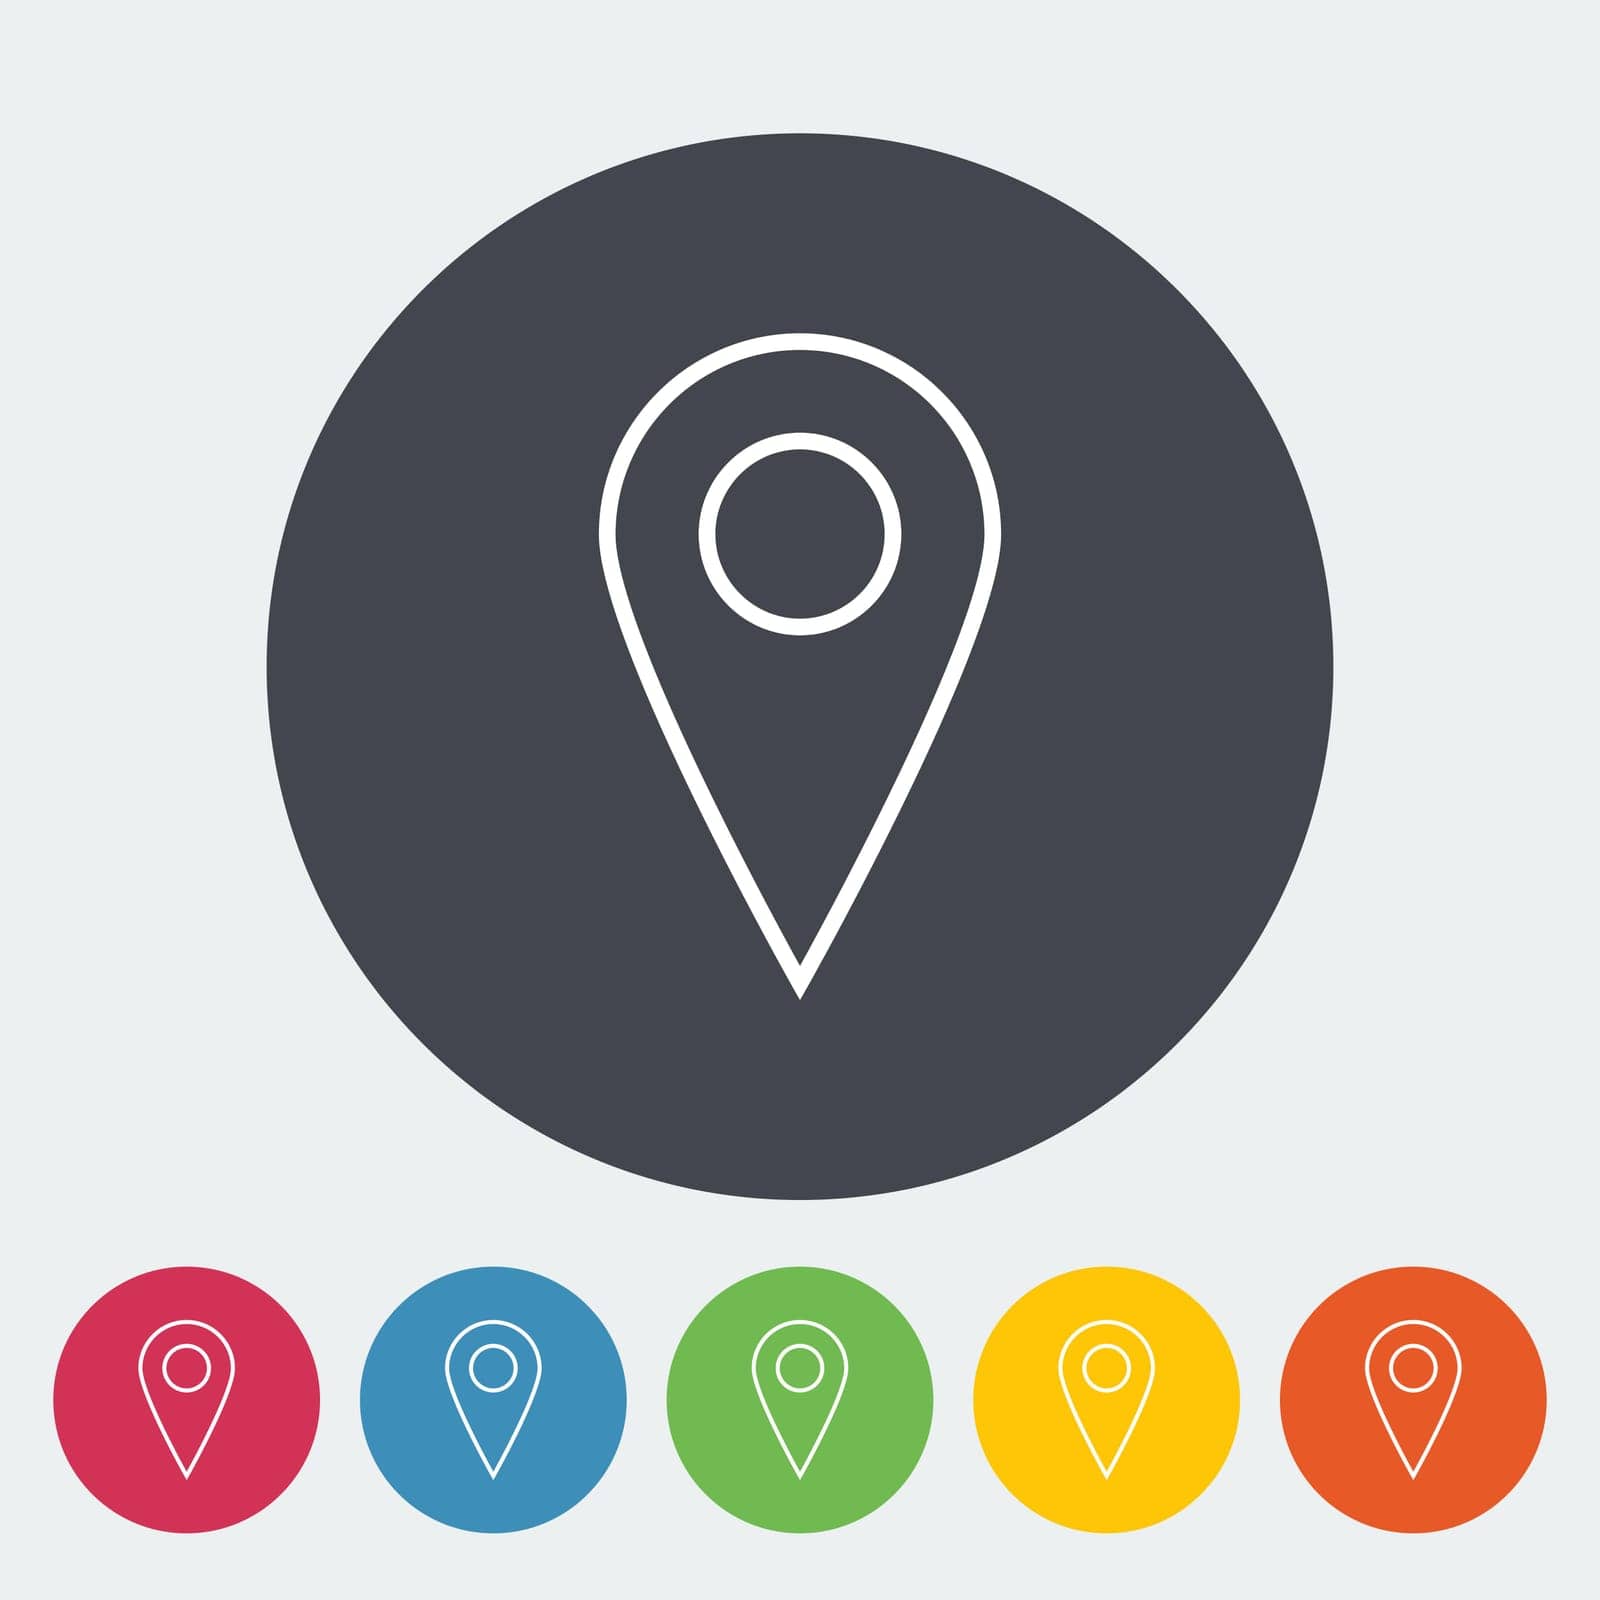 Map pointer. Single flat icon on the circle. Vector illustration.